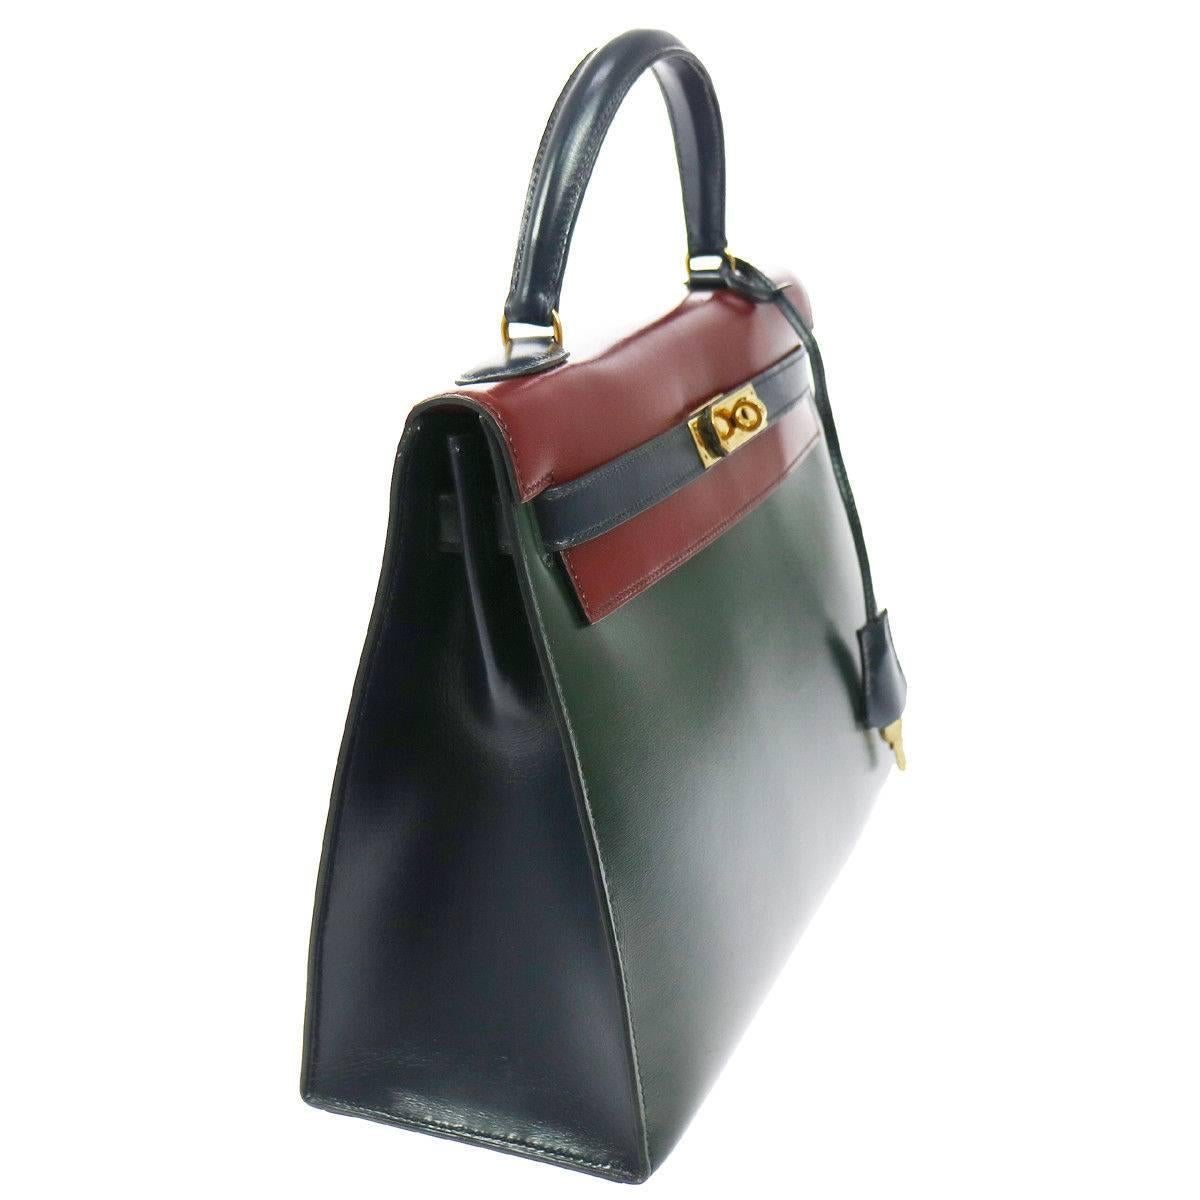 Hermes Kelly 32 Sellier Bordeaux Green Blue Leather Top Handle Satchel Flap Bag

Leather 
Leather lining
Gold tone hardware
Date code Circle S
Made in France
Handle drop 4"
Measures 12.5" W x 9.5" H x 4.75" D
Includes original